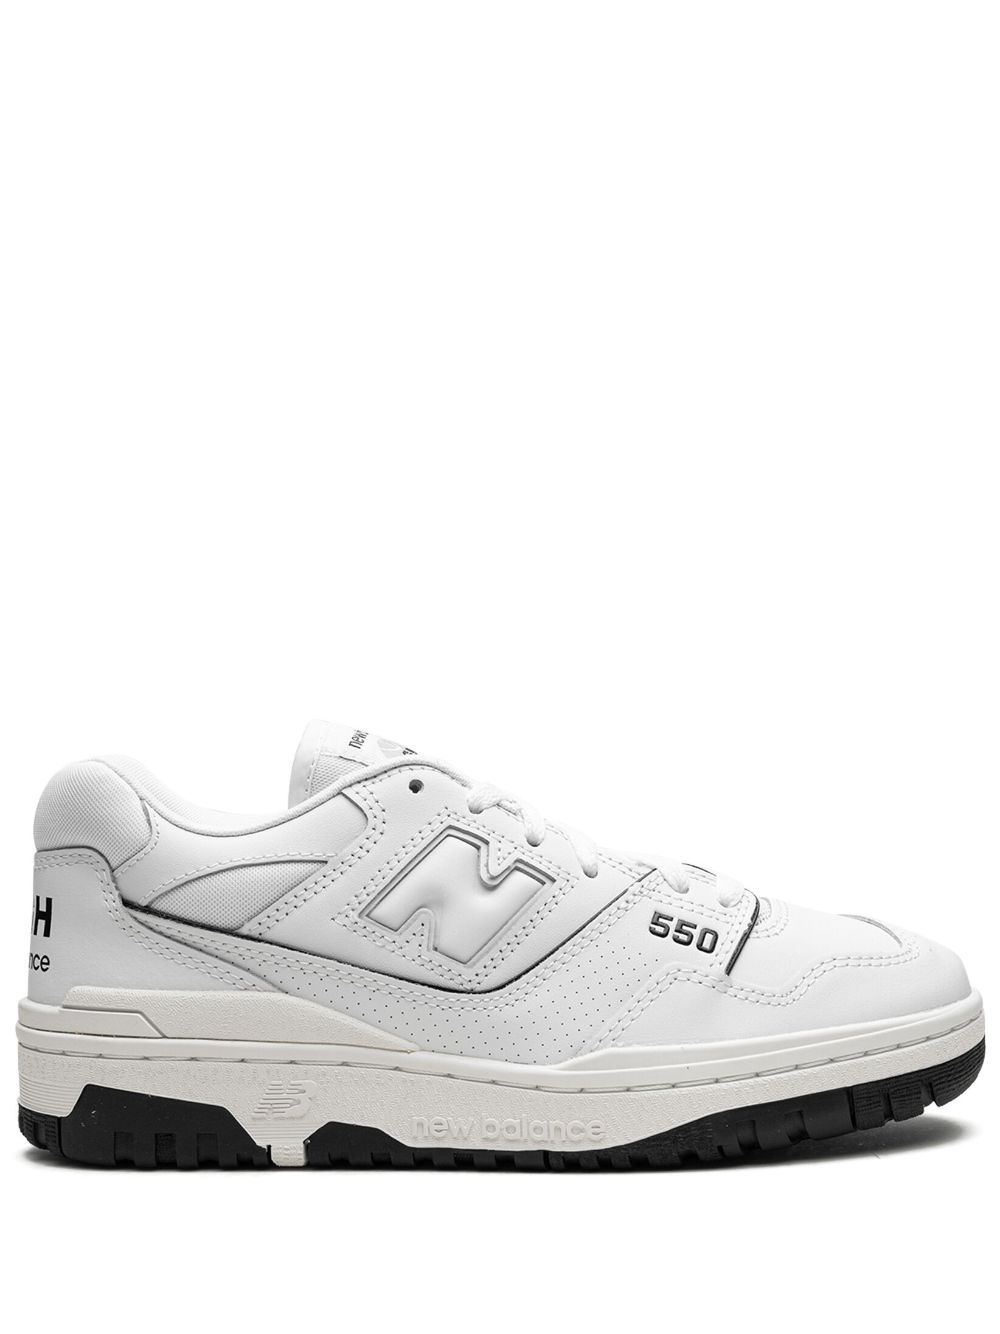 New Balance x CDG 550 low-top sneakers - White von New Balance